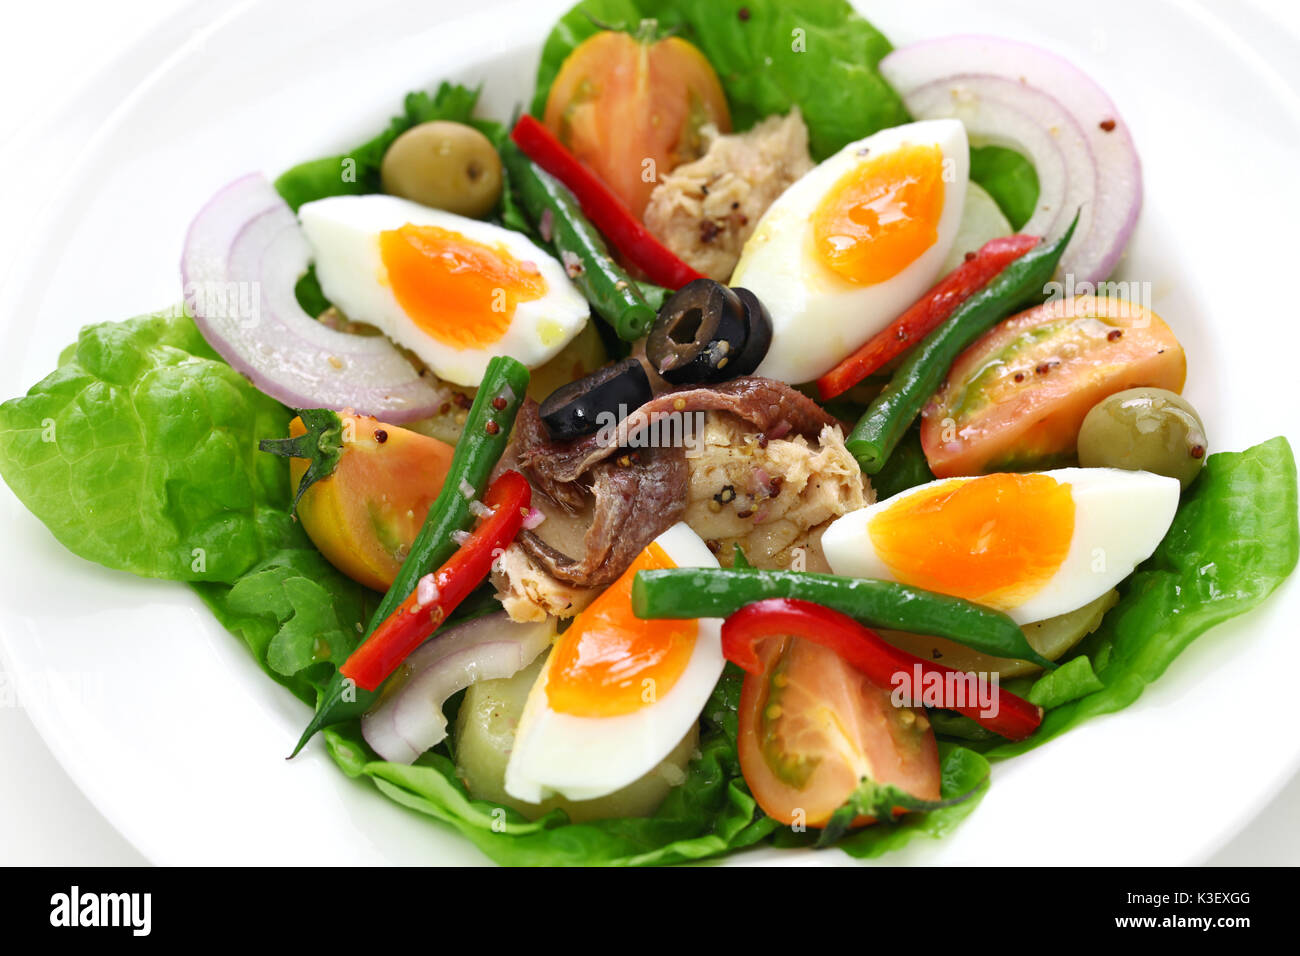 nicoise salad, french traditional cuisine Stock Photo